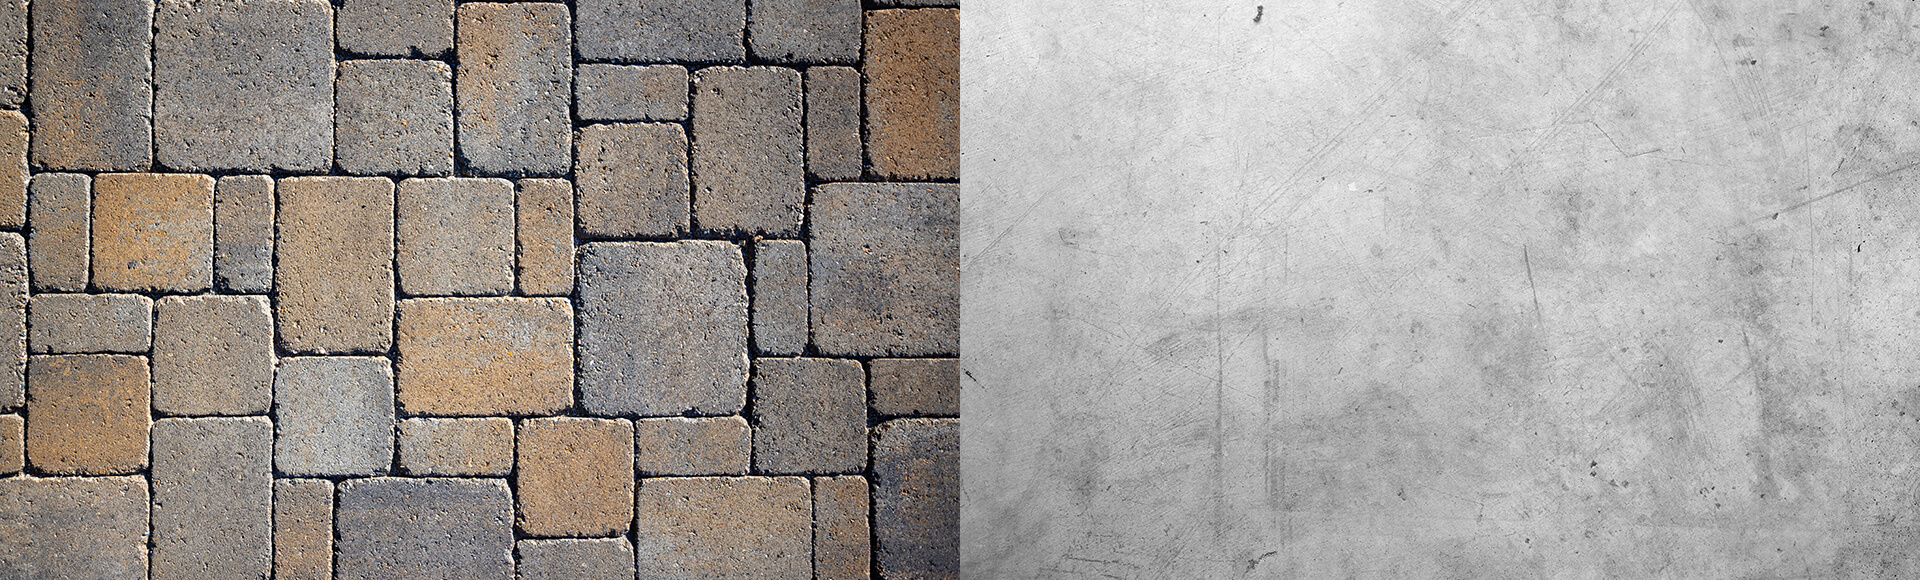 Paving stones and concrete image. 